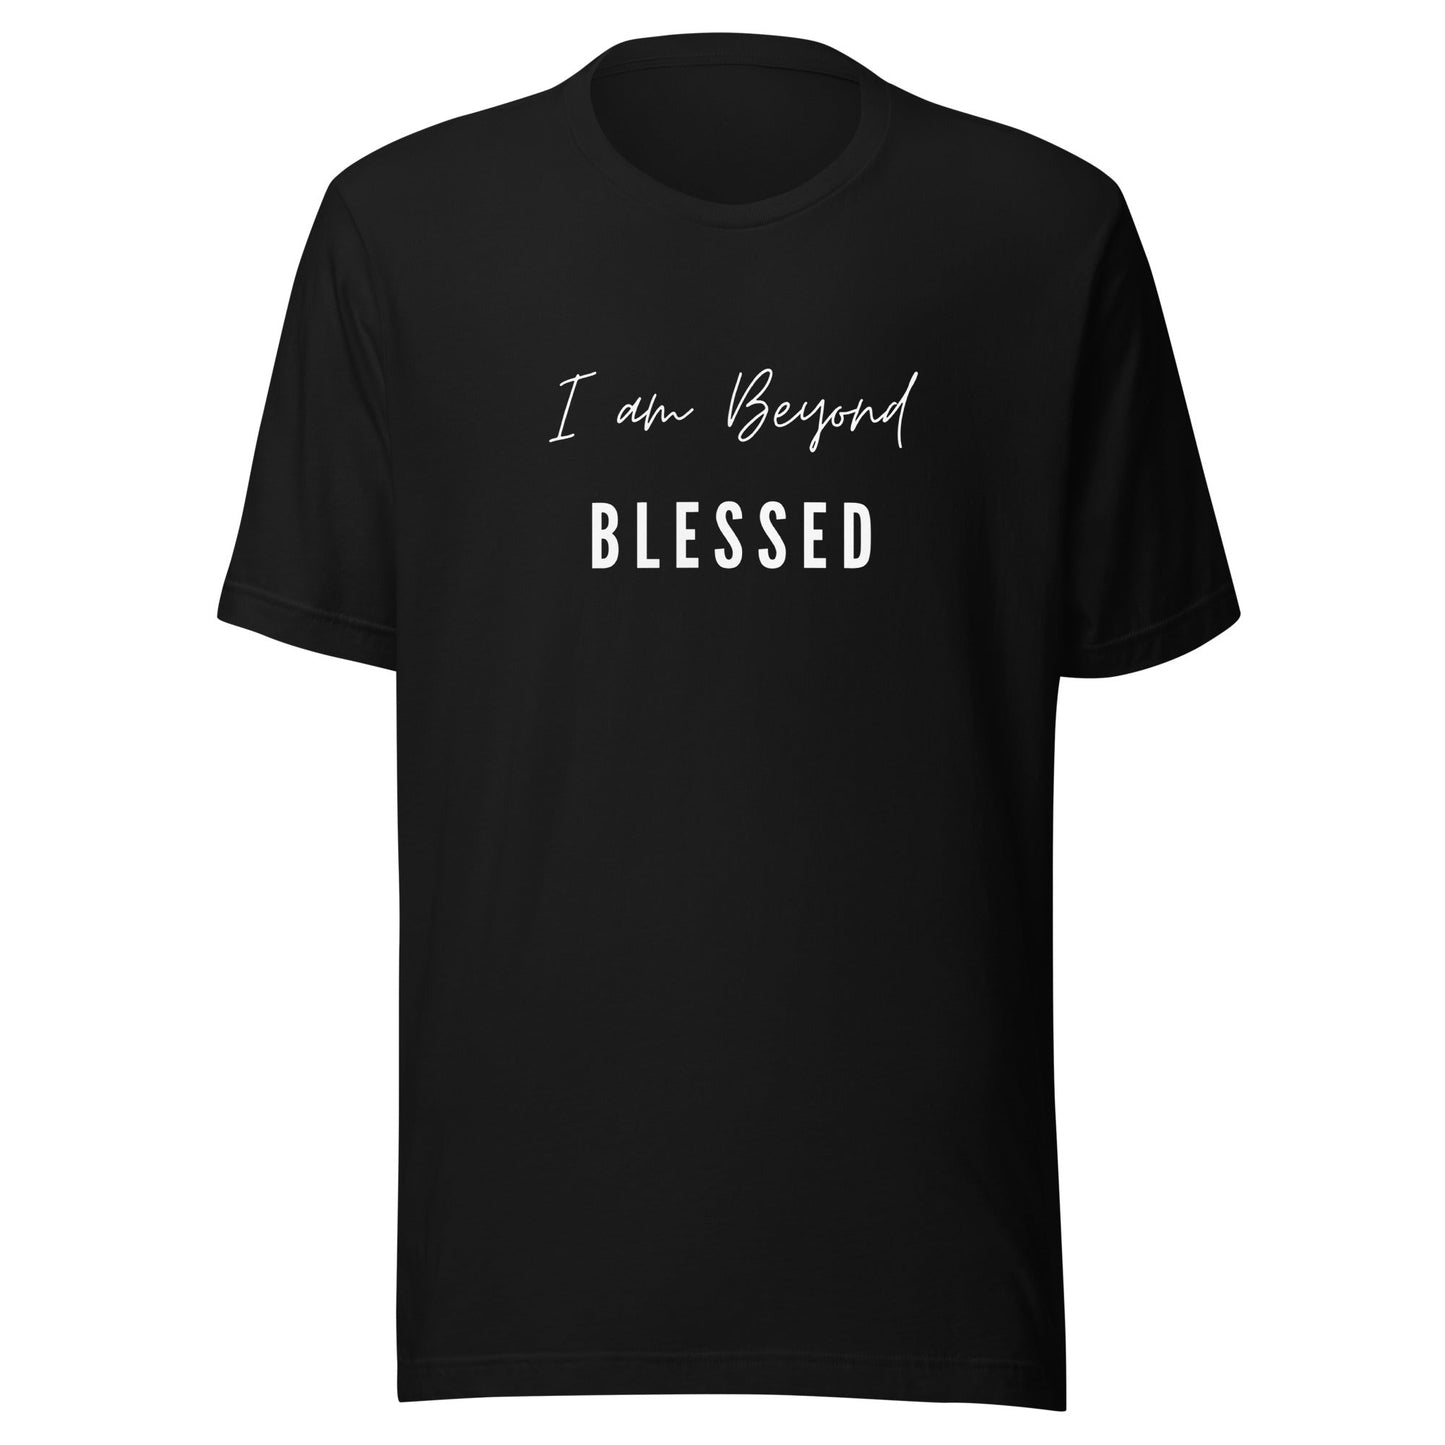 Beyond Blessed - Unisex t-shirt - lilaloop -